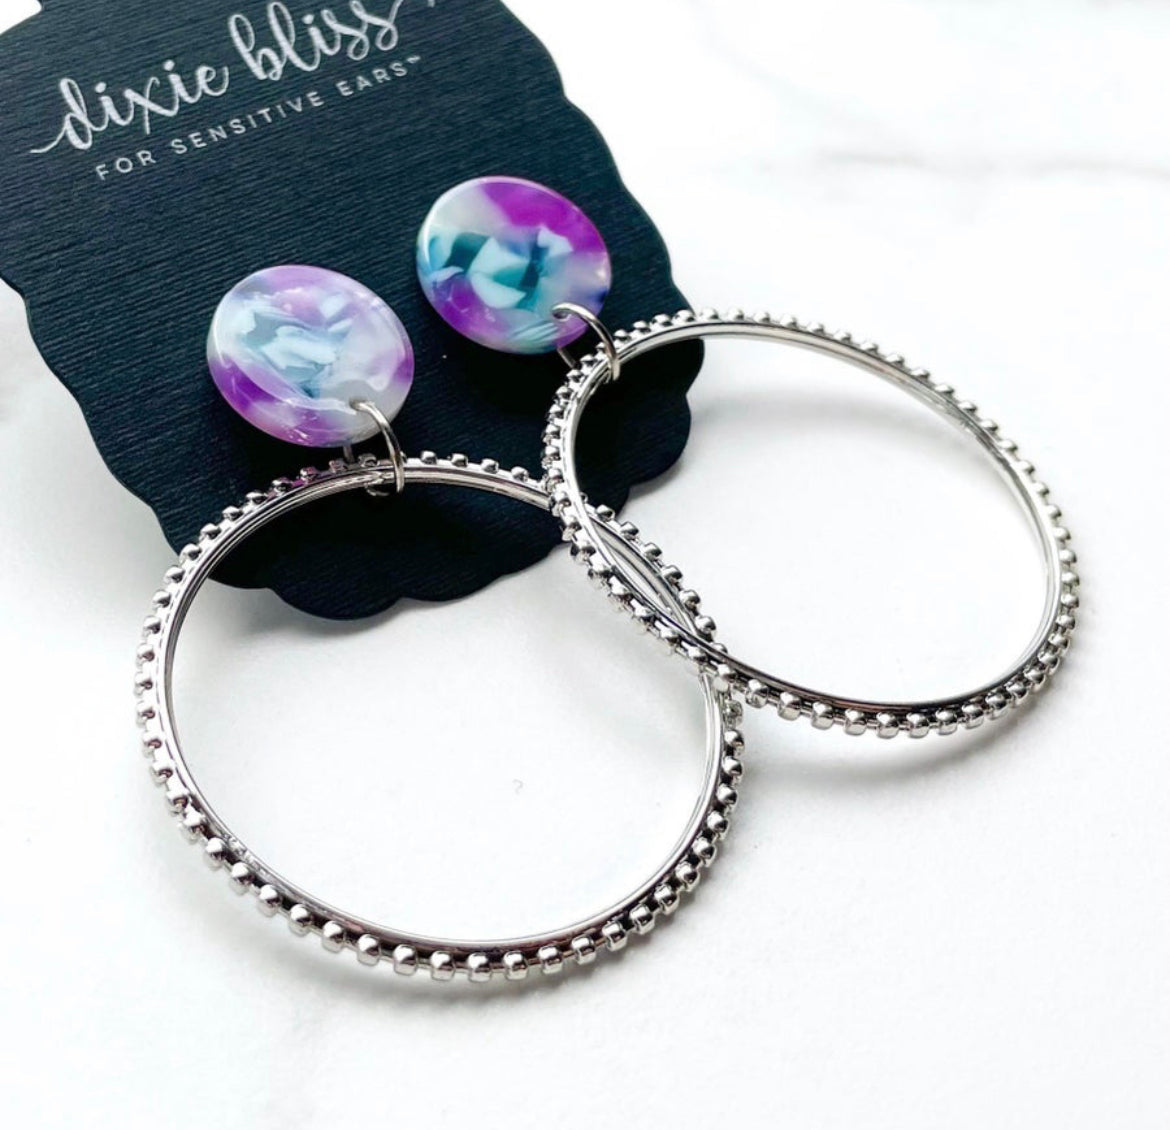 Confidence in Spring Wisteria Marble - Dixie Bliss - Dangle Earring